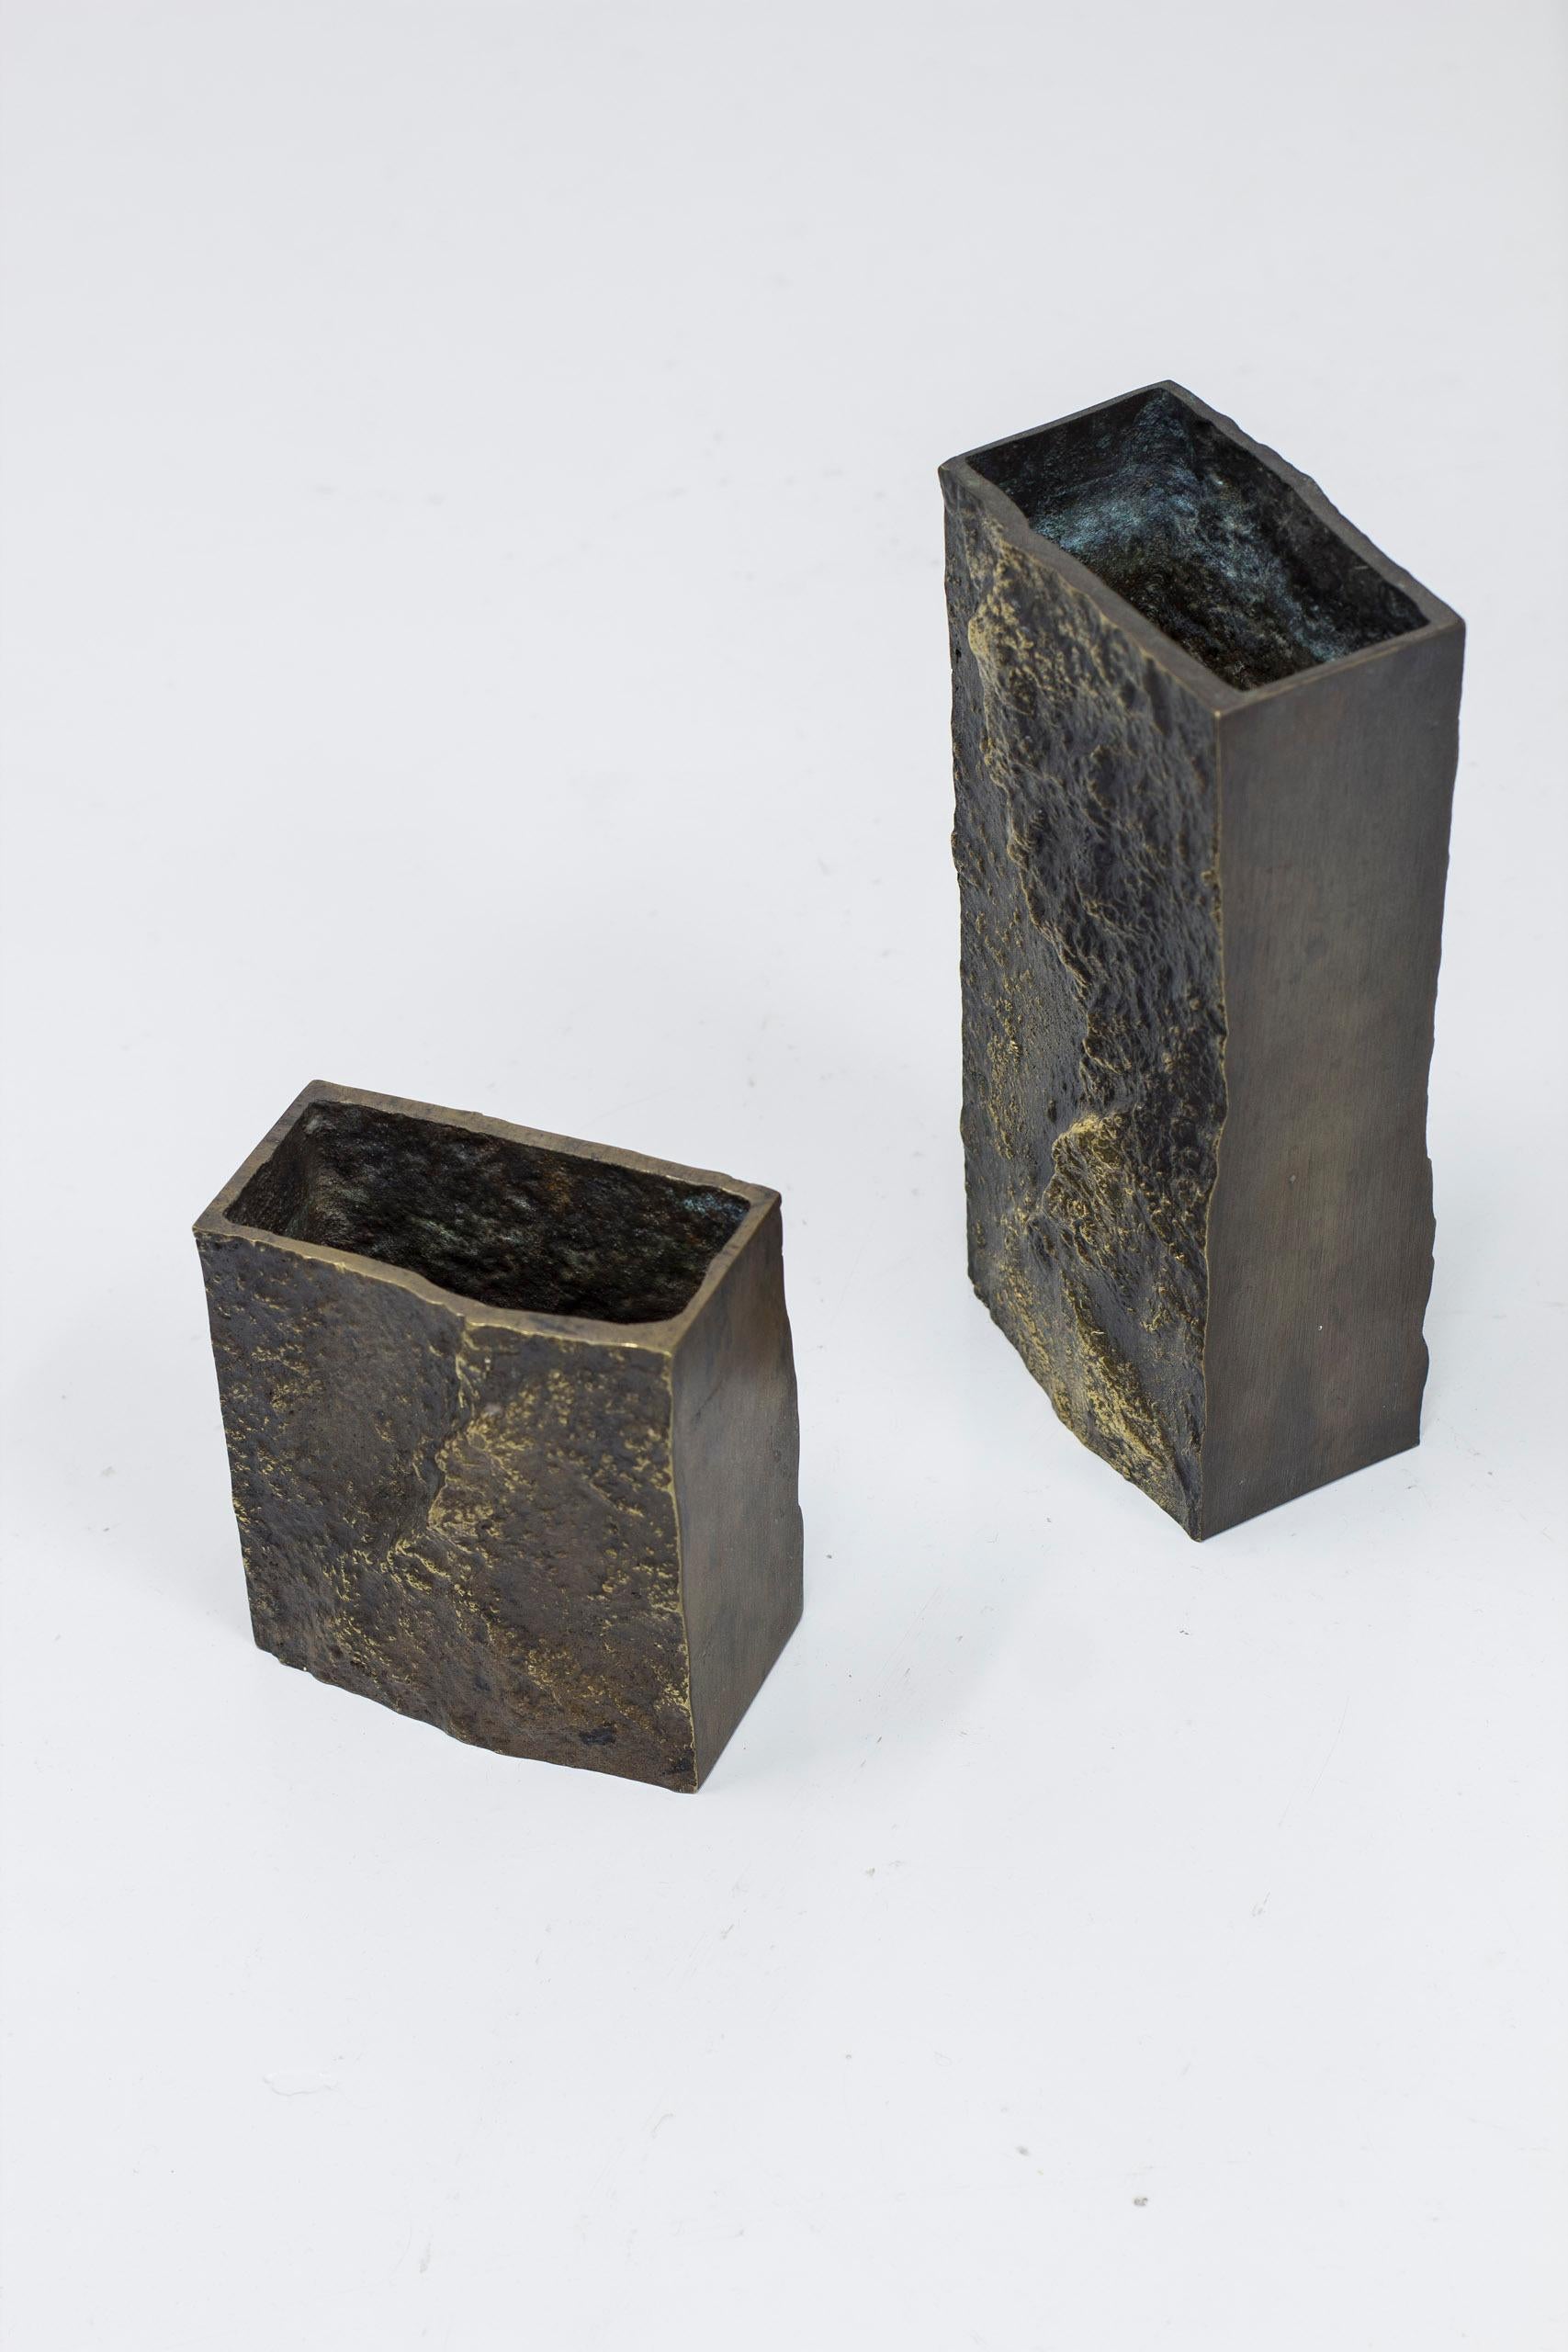 Brutalist bronze vases designed by Kaj Blomqvist. Produced in Finland by Rakennusvaline during the 1960s. Made from solid cast bronze. Partly polished.  Very good vintage condition with light age related wear/patina.

 

Price for the set of two